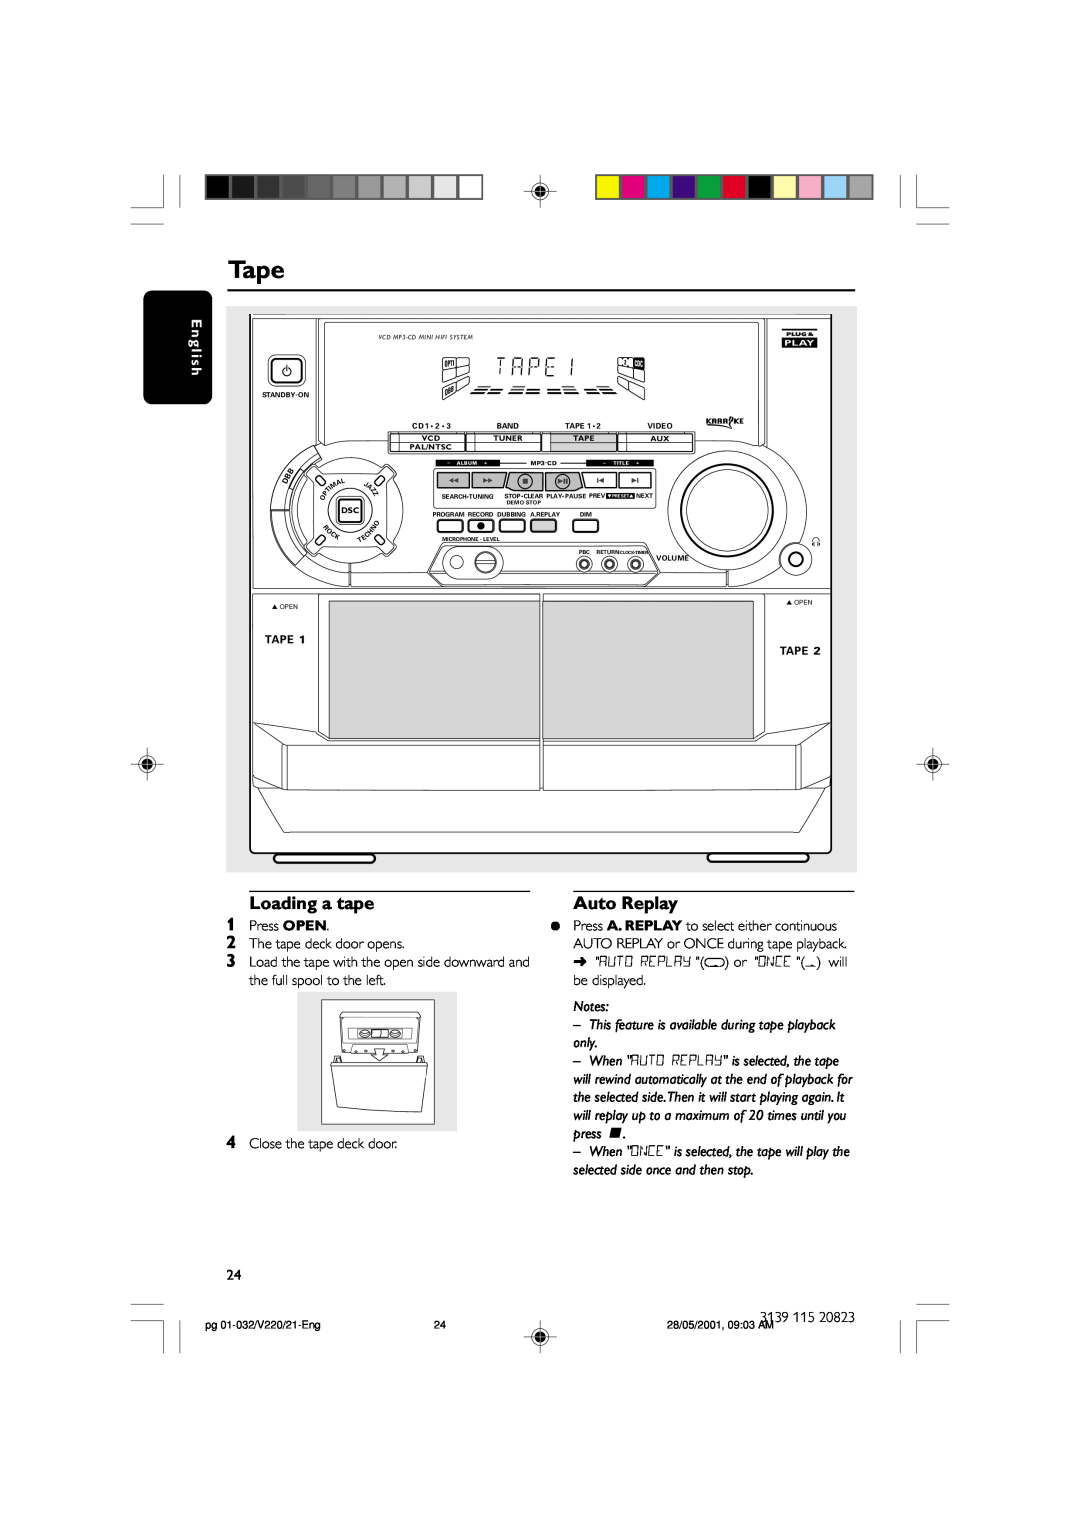 Philips FW-V220/21 manual Tape, Loading a tape, Auto Replay, This feature is available during tape playback 